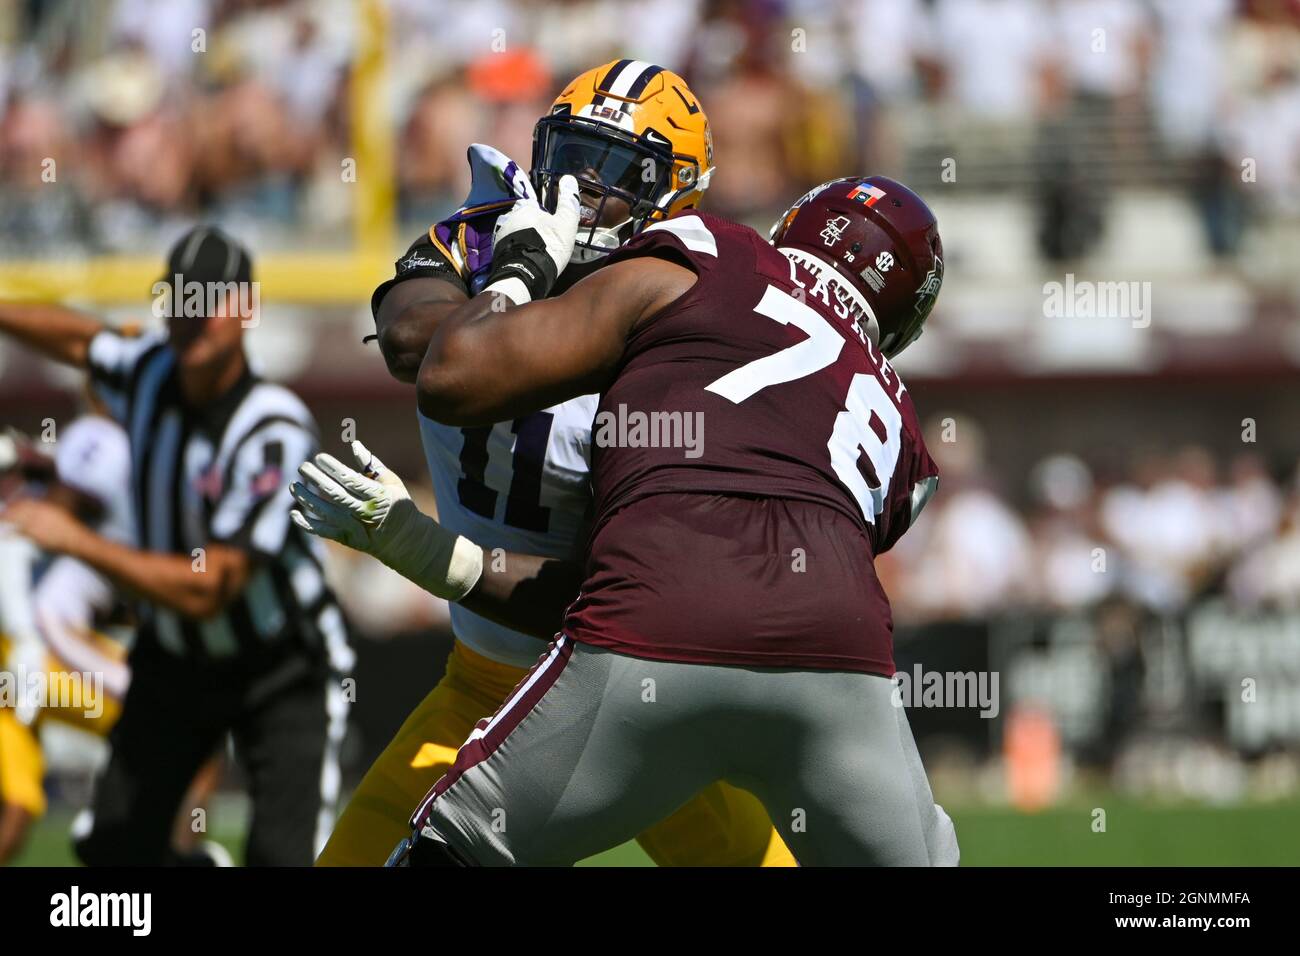 Starkville, MS, USA. 25th Sep, 2021. LSU Tigers defensive end Ali Gaye (11) and Mississippi State Bulldogs offensive lineman Scott Lashley (78) in action during the NCAA football game between the LSU Tigers and the Mississippi State Bulldogs at Davis Wade Stadium in Starkville, MS. Kevin Langley/CSM/Alamy Live News Stock Photo